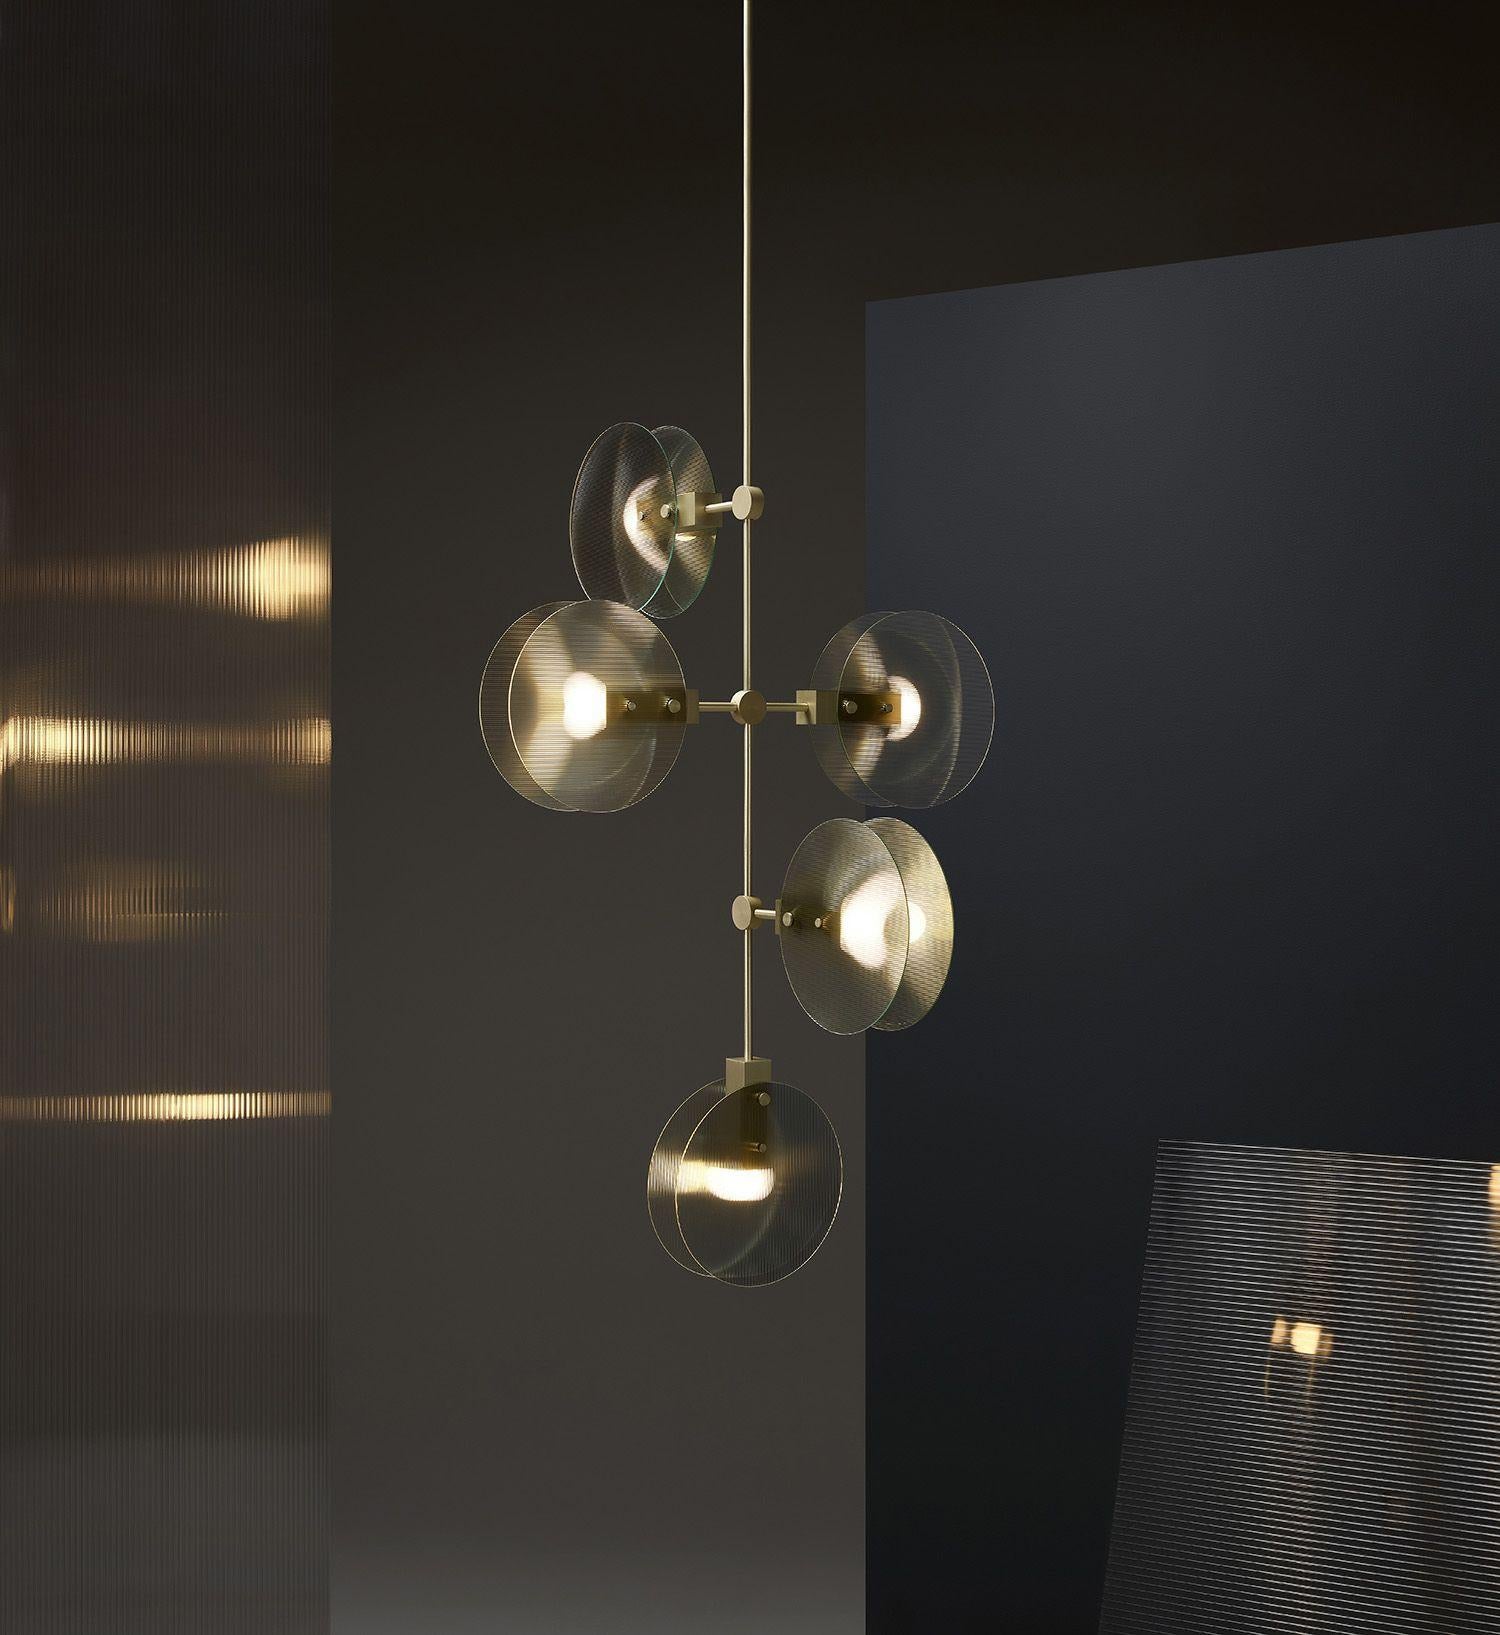 The Nebulae Collection is inspired by the diffusion of both natural and LED light. The geometric machined forms coupled with the fluid glass discs creates a balance between the elements.

The chandelier can be composed in a variety of hanging